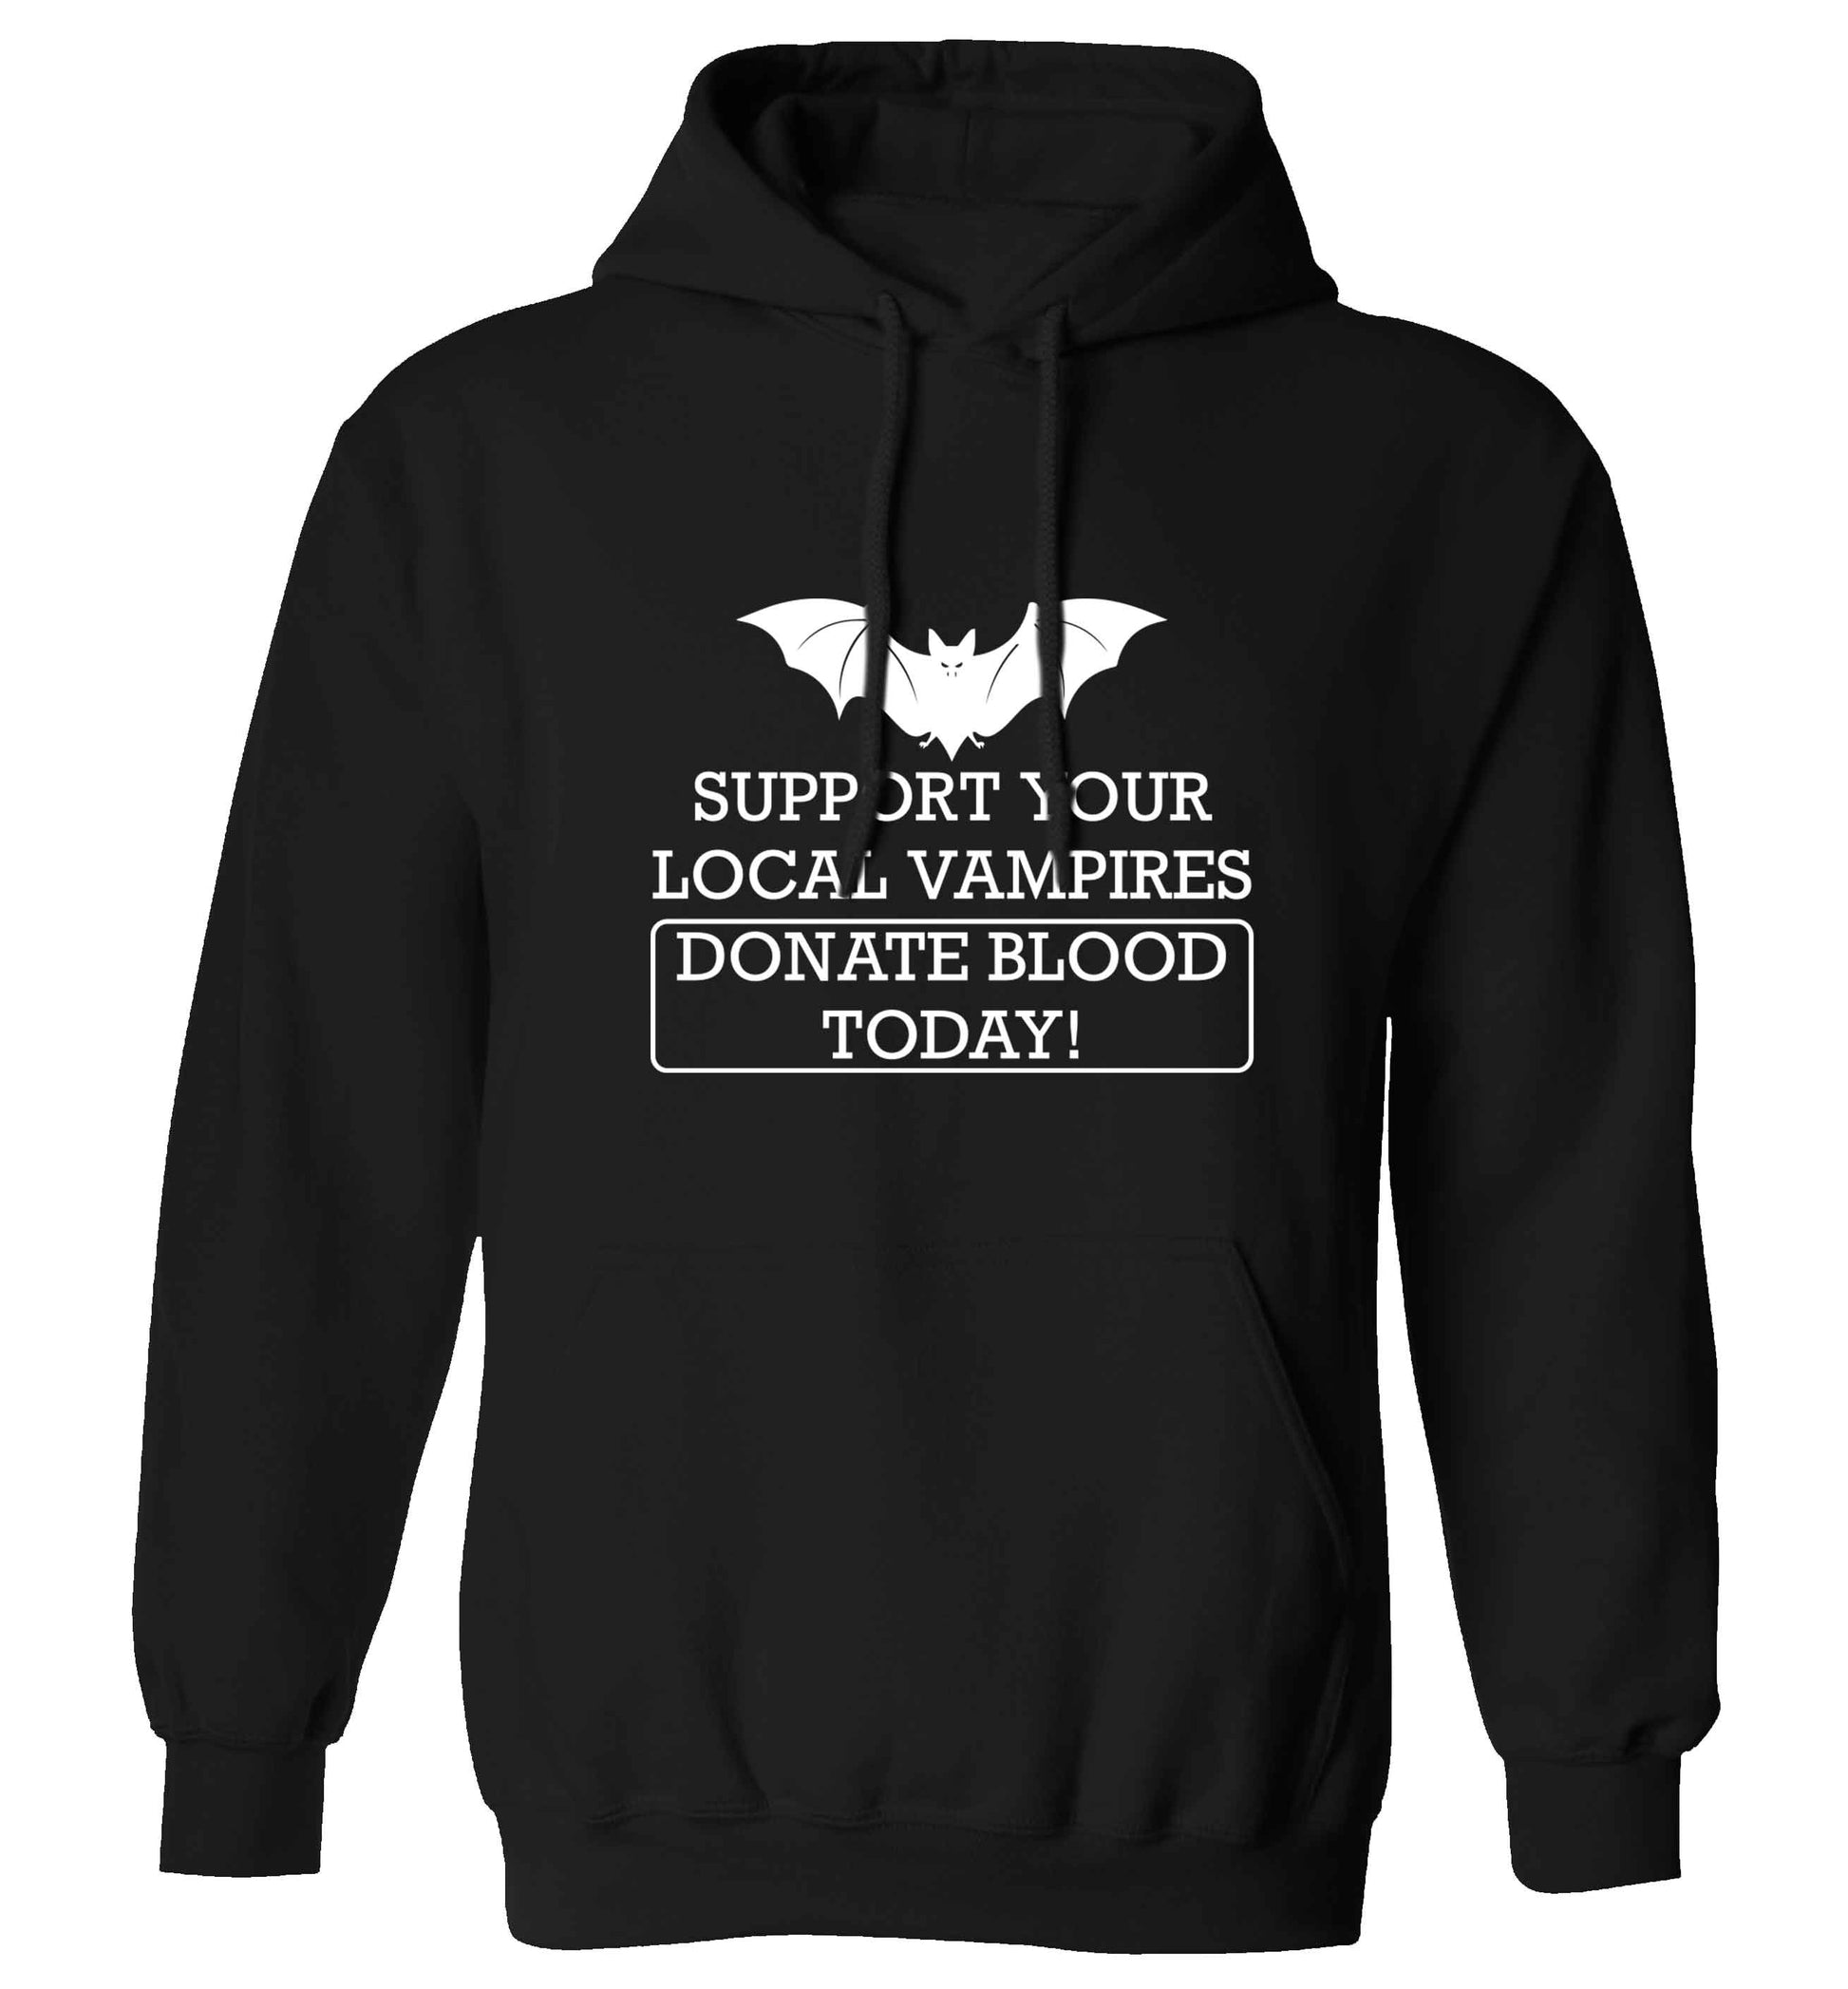 Support your local vampires donate blood today! adults unisex black hoodie 2XL